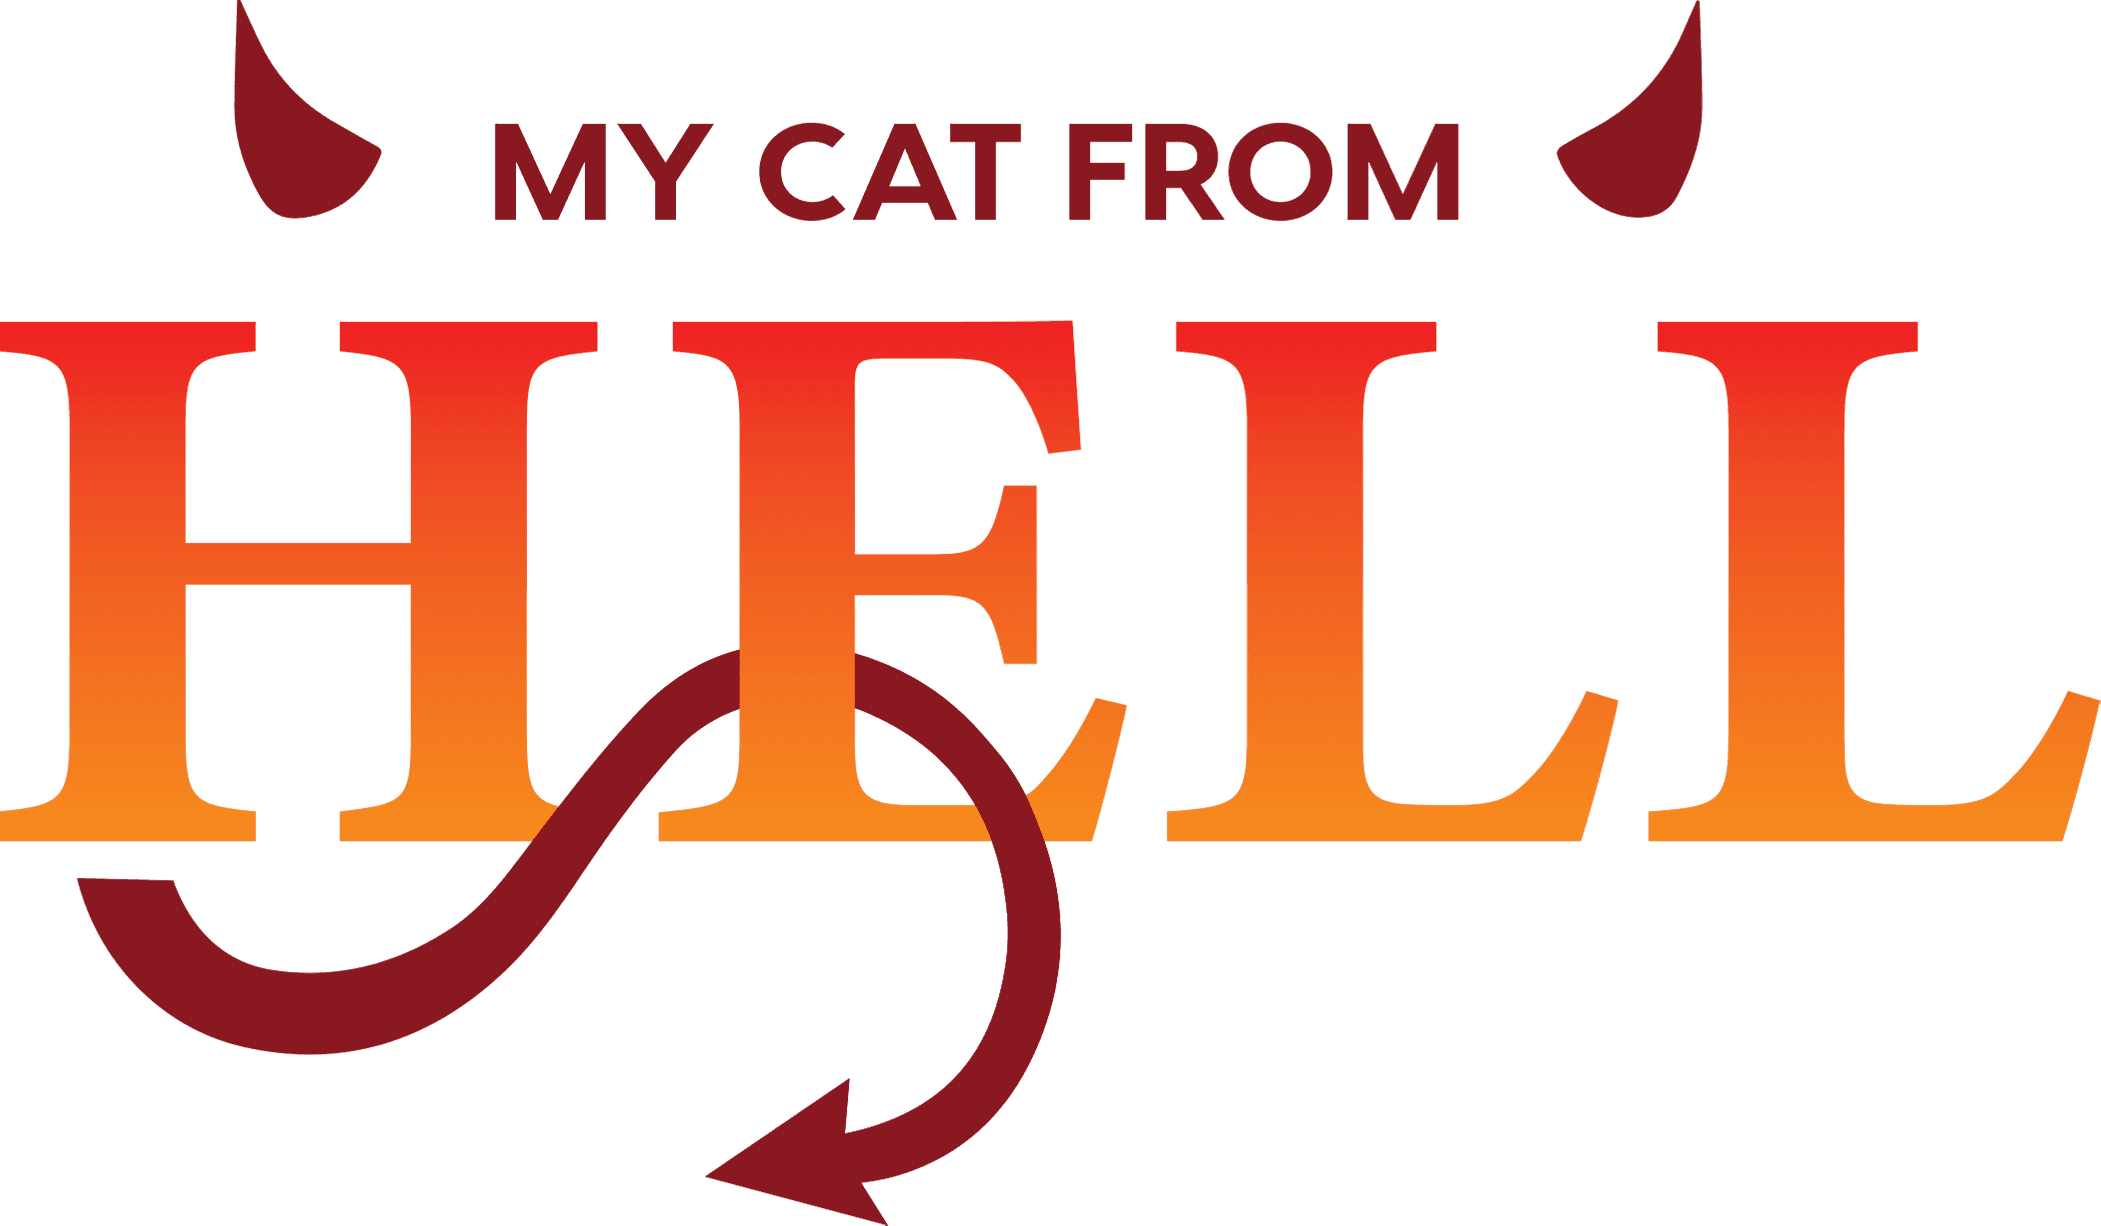 My Cat from Hell logo